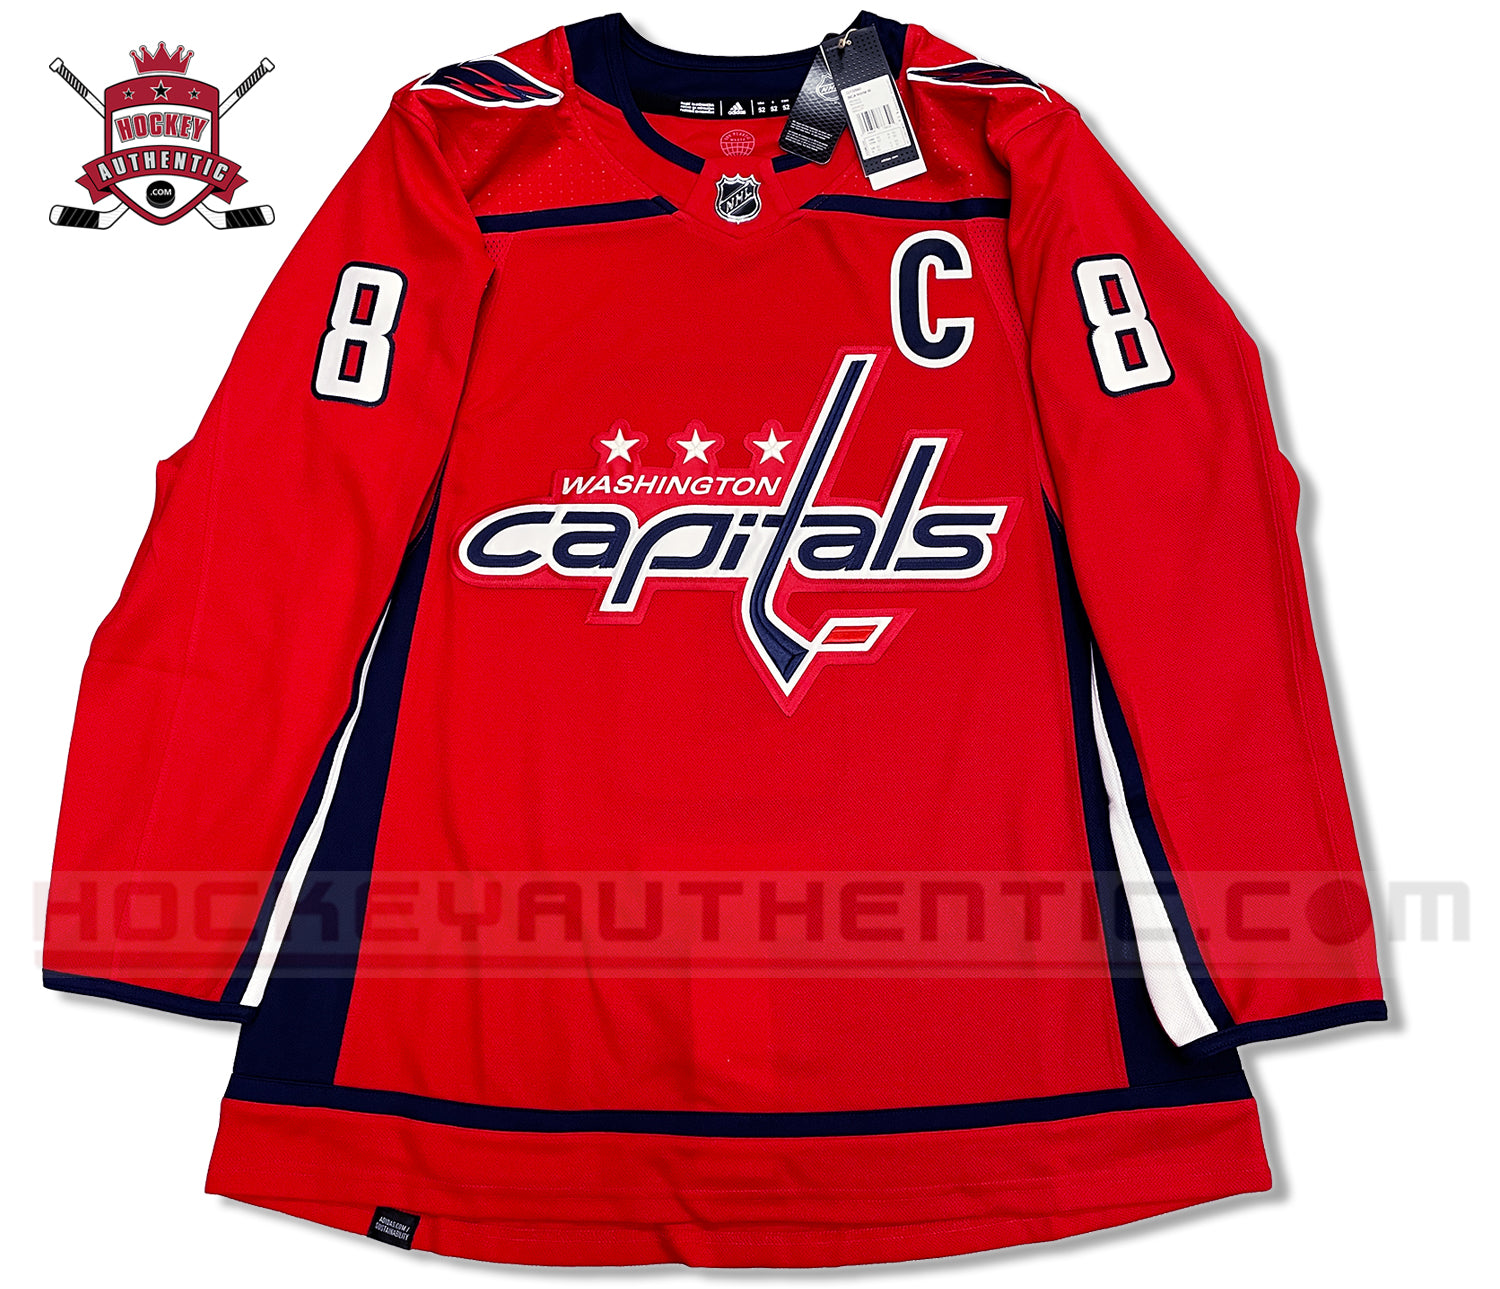 Washington Capitals: Taking a Look at T.J. Oshie's Unique Jersey Collar